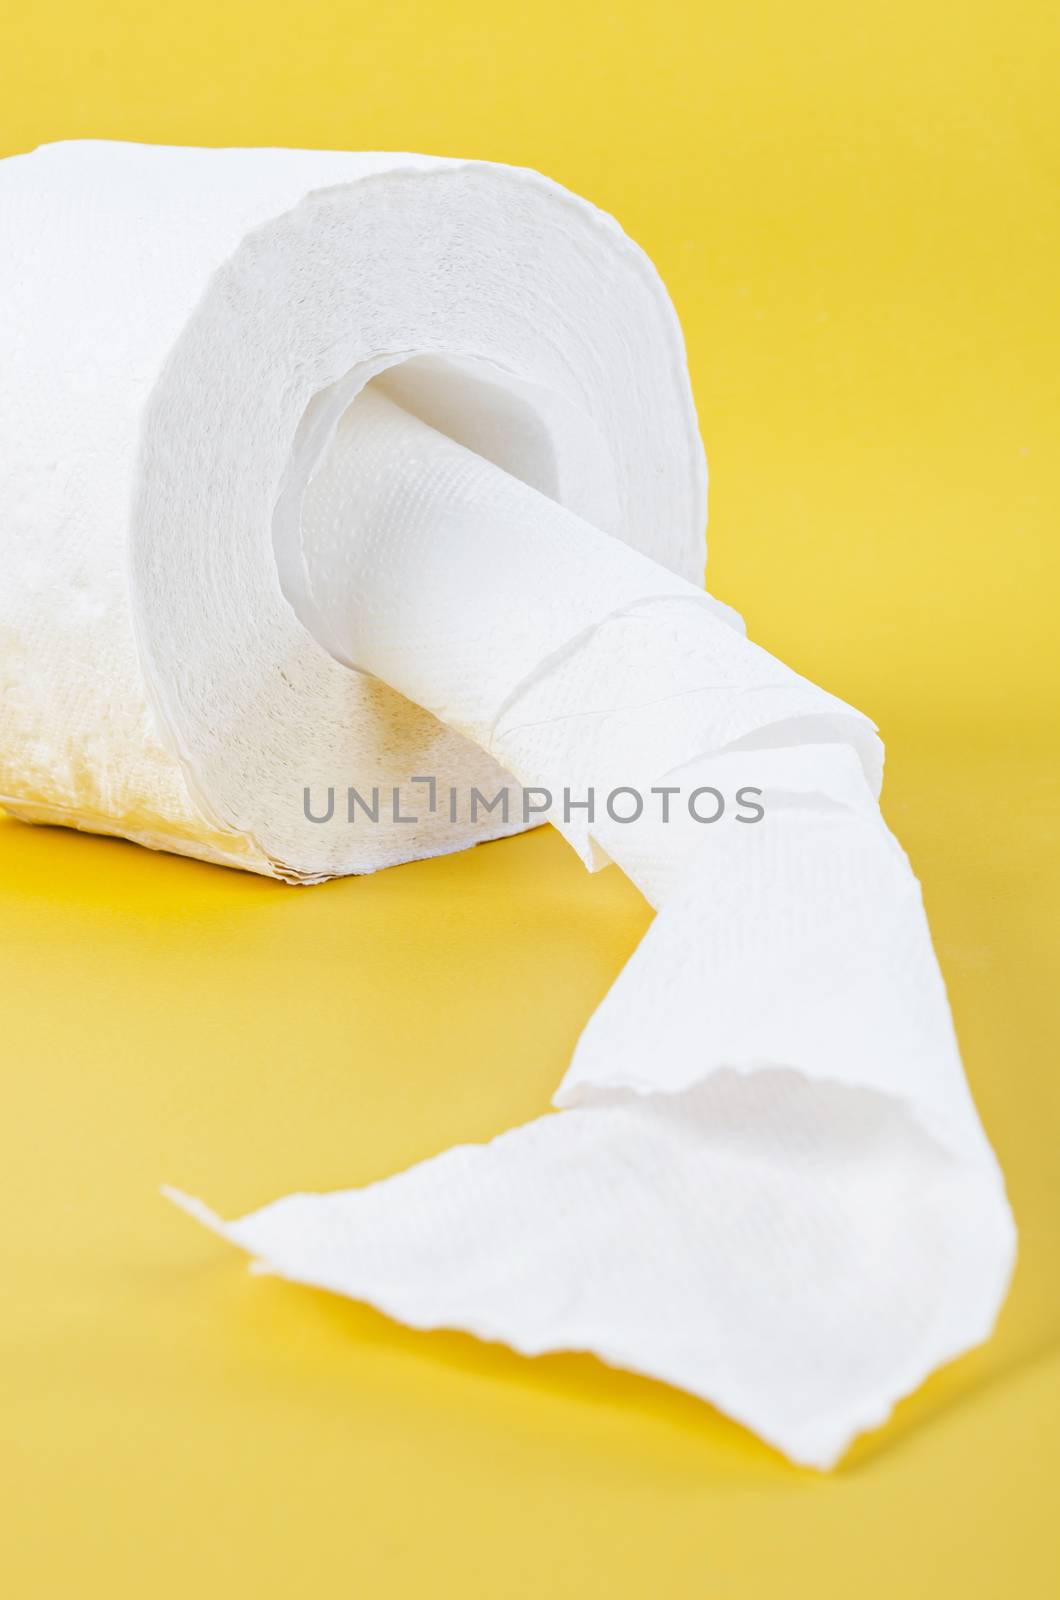 Tissue paper roll on the yellow background.